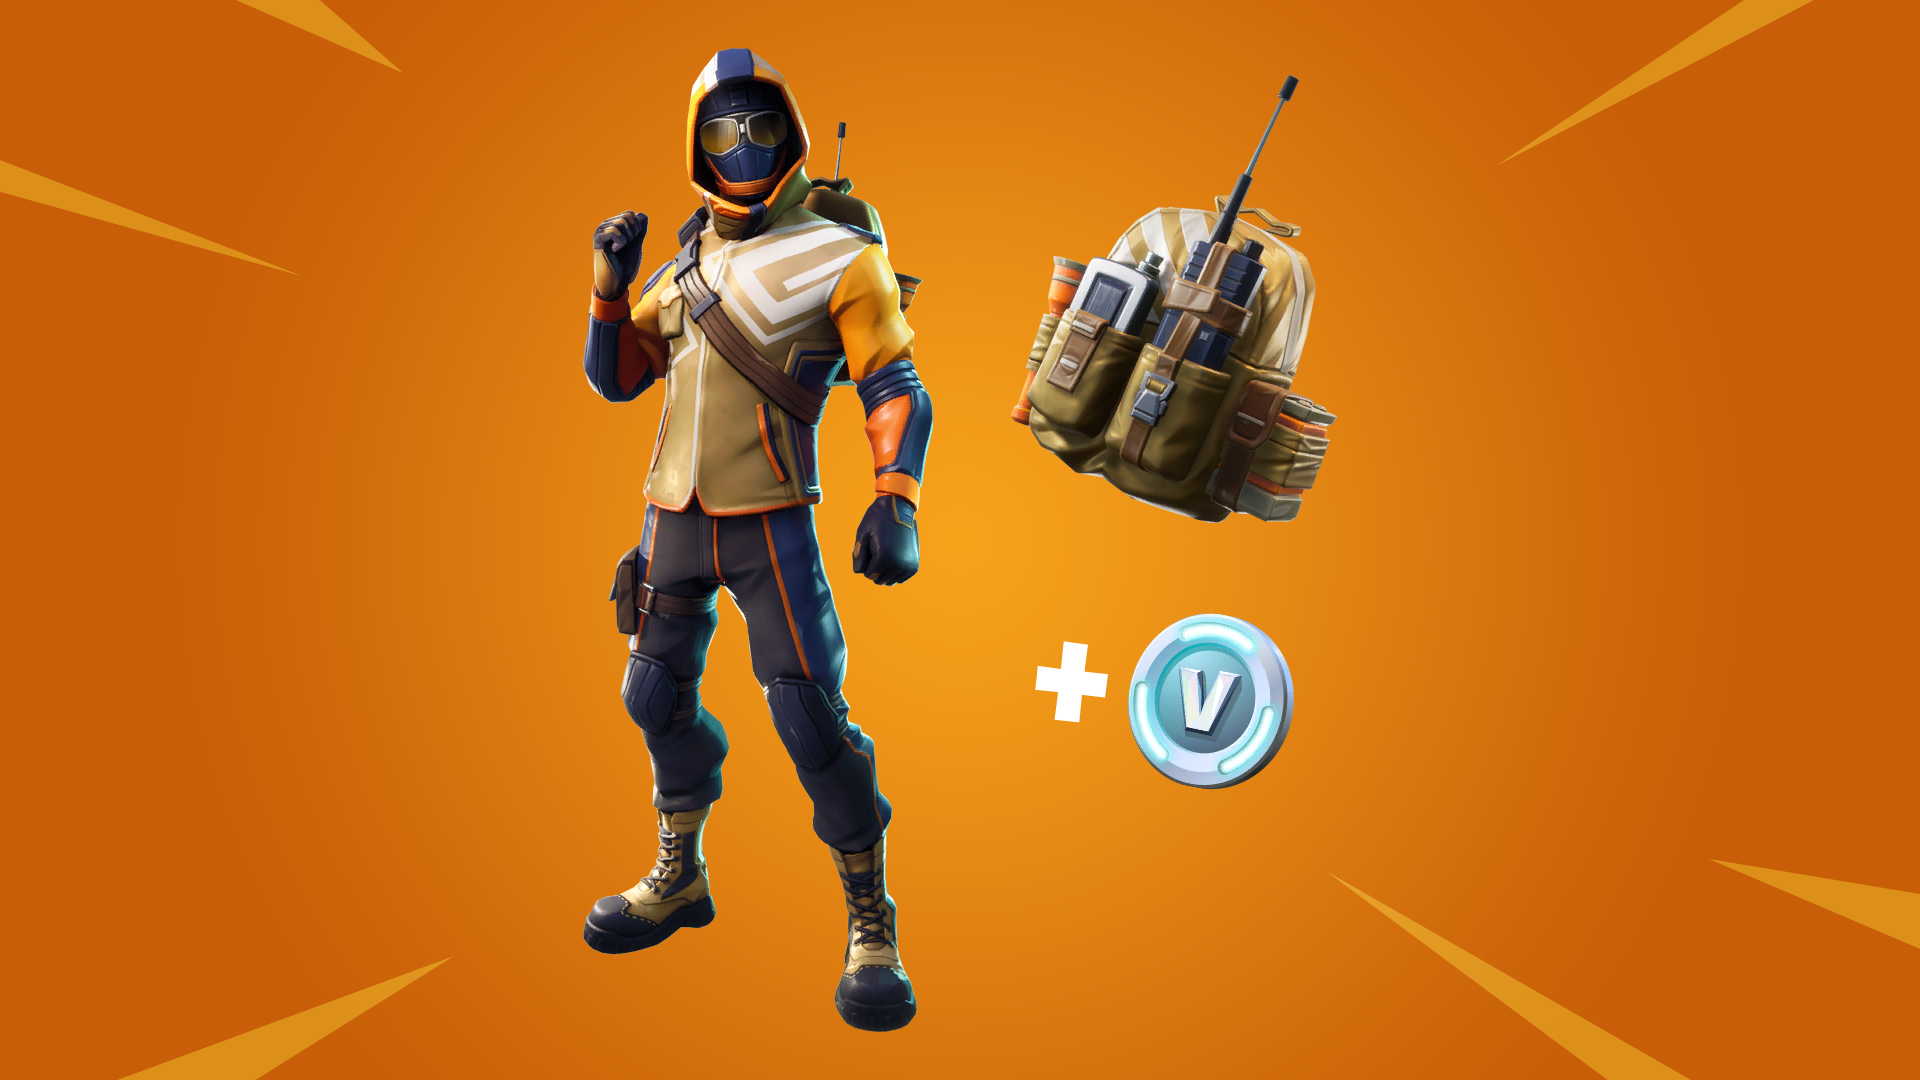 summit striker starter pack is now available in fortnite battle royale - ace pack fortnite